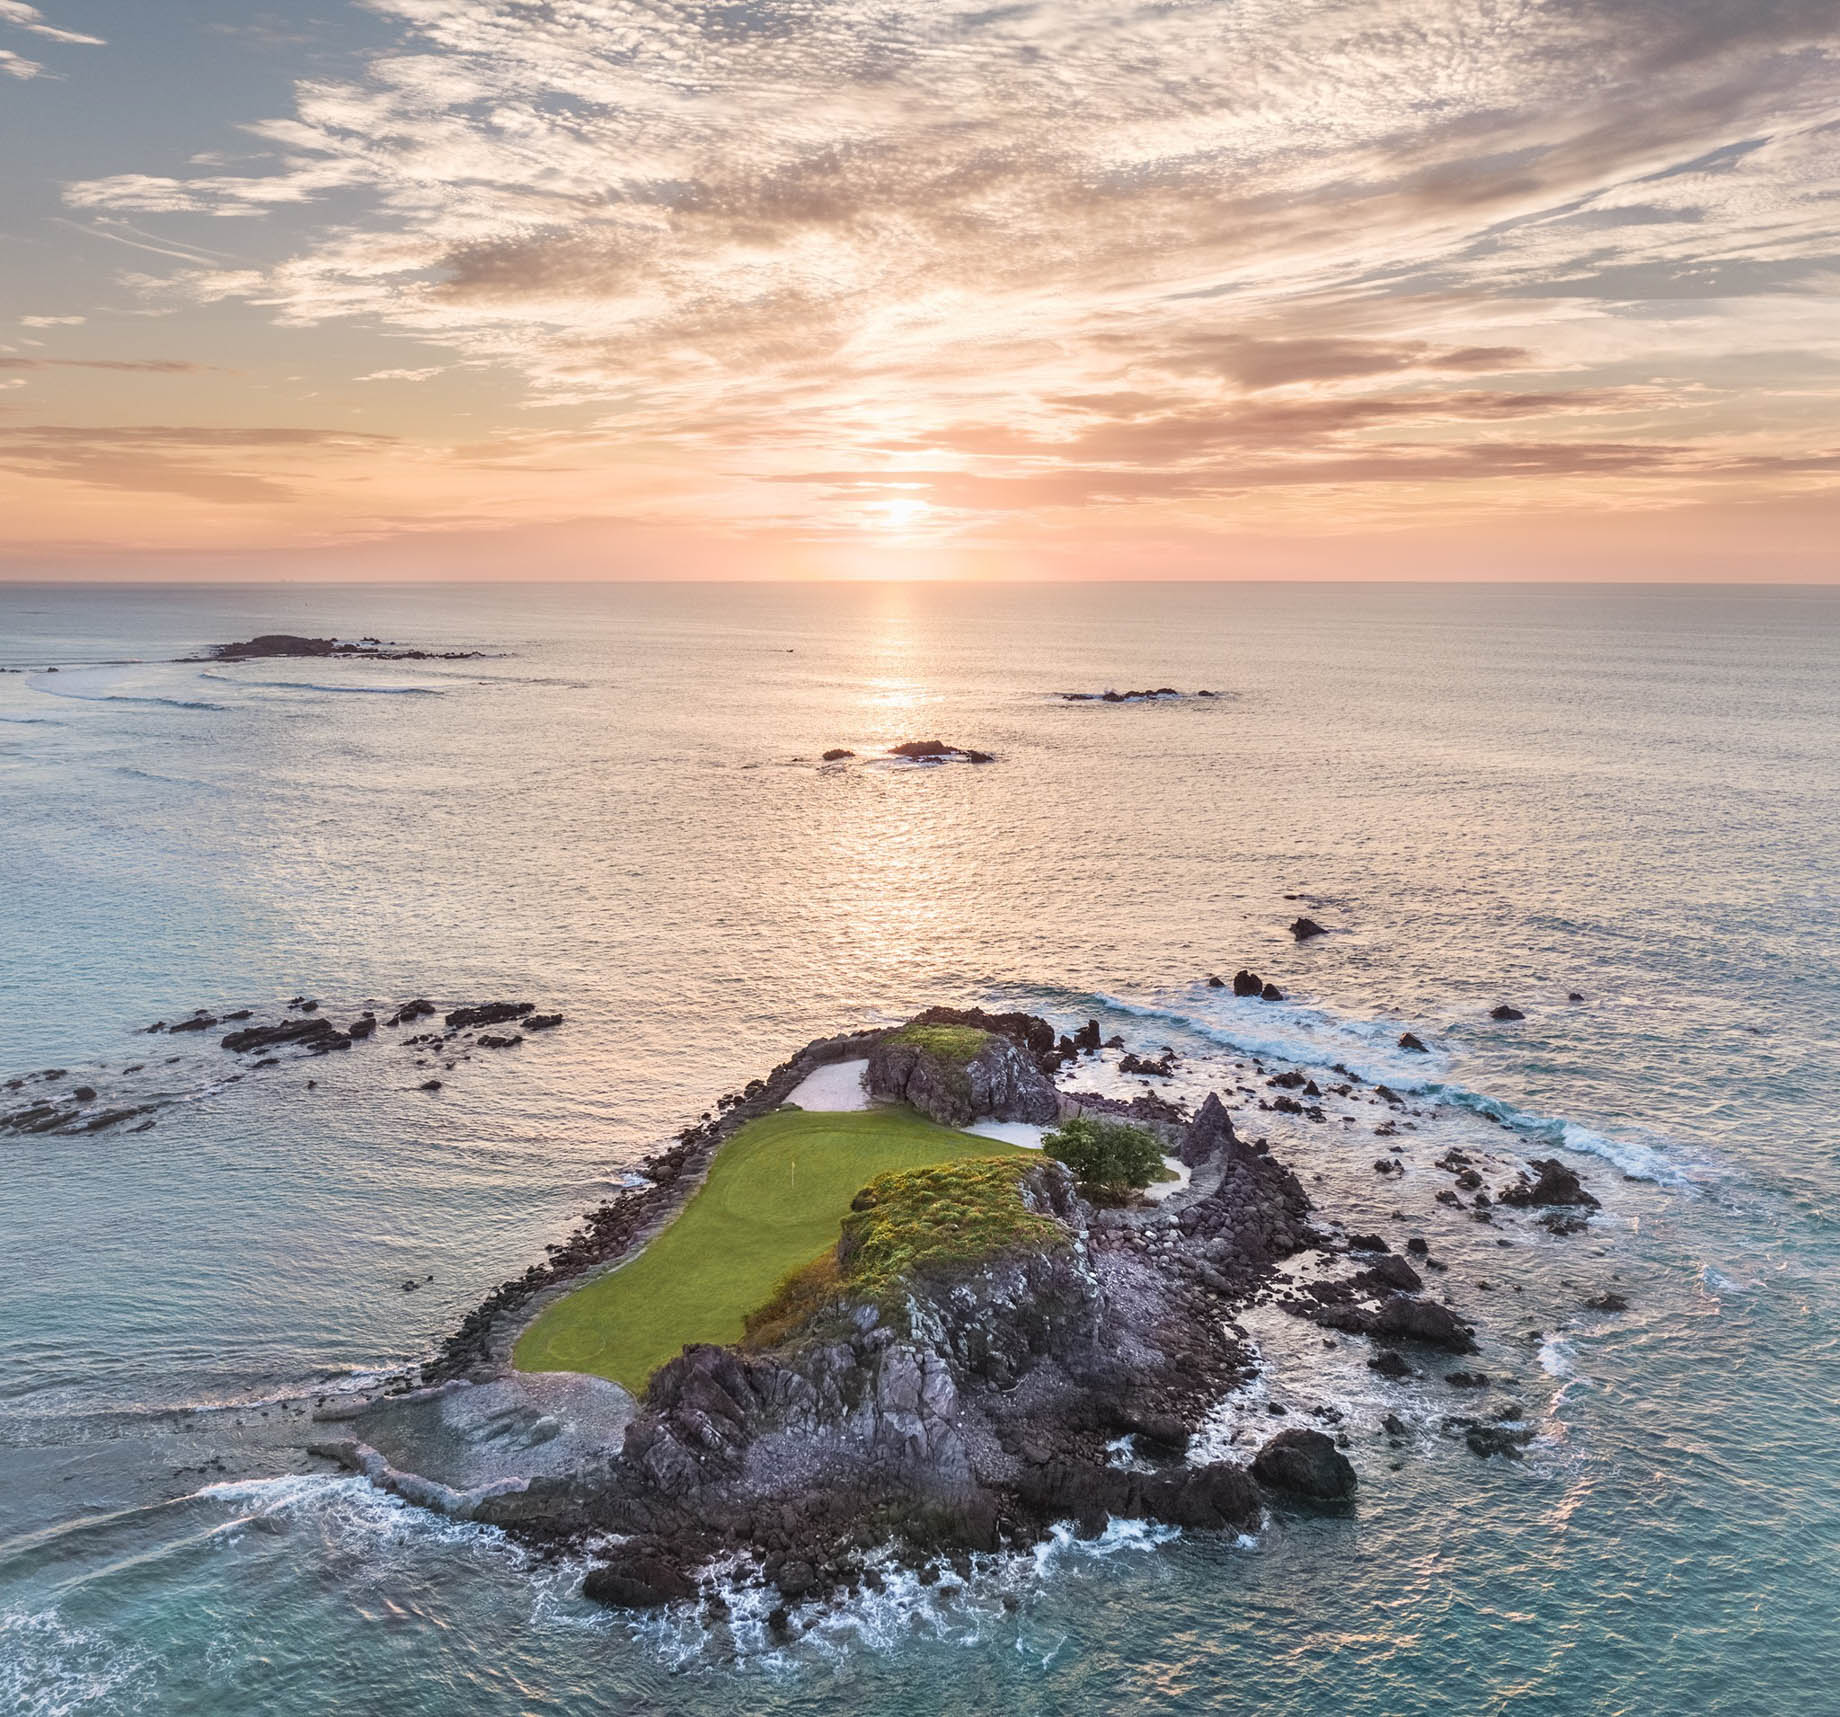 The St. Regis Punta Mita Resort - Nayarit, Mexico - Resort Golf Course Aerial View Tail of the Whale Hole